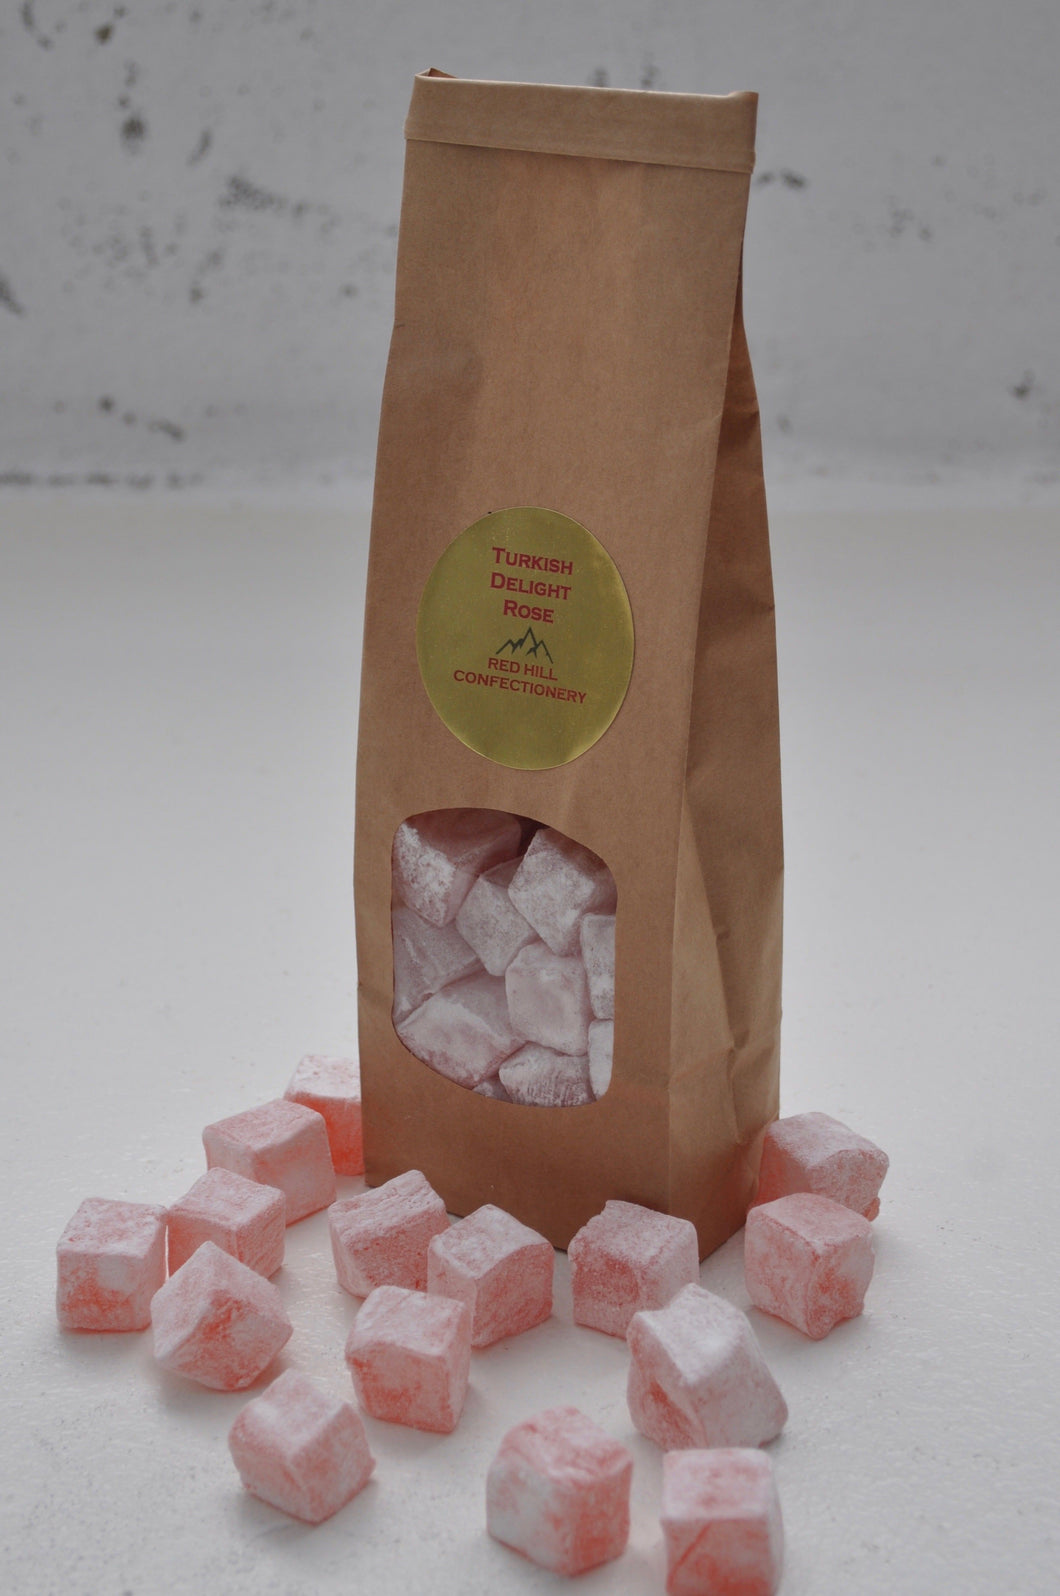 Red Hill Confectionery - Rose Turkish Delight 400g Bag